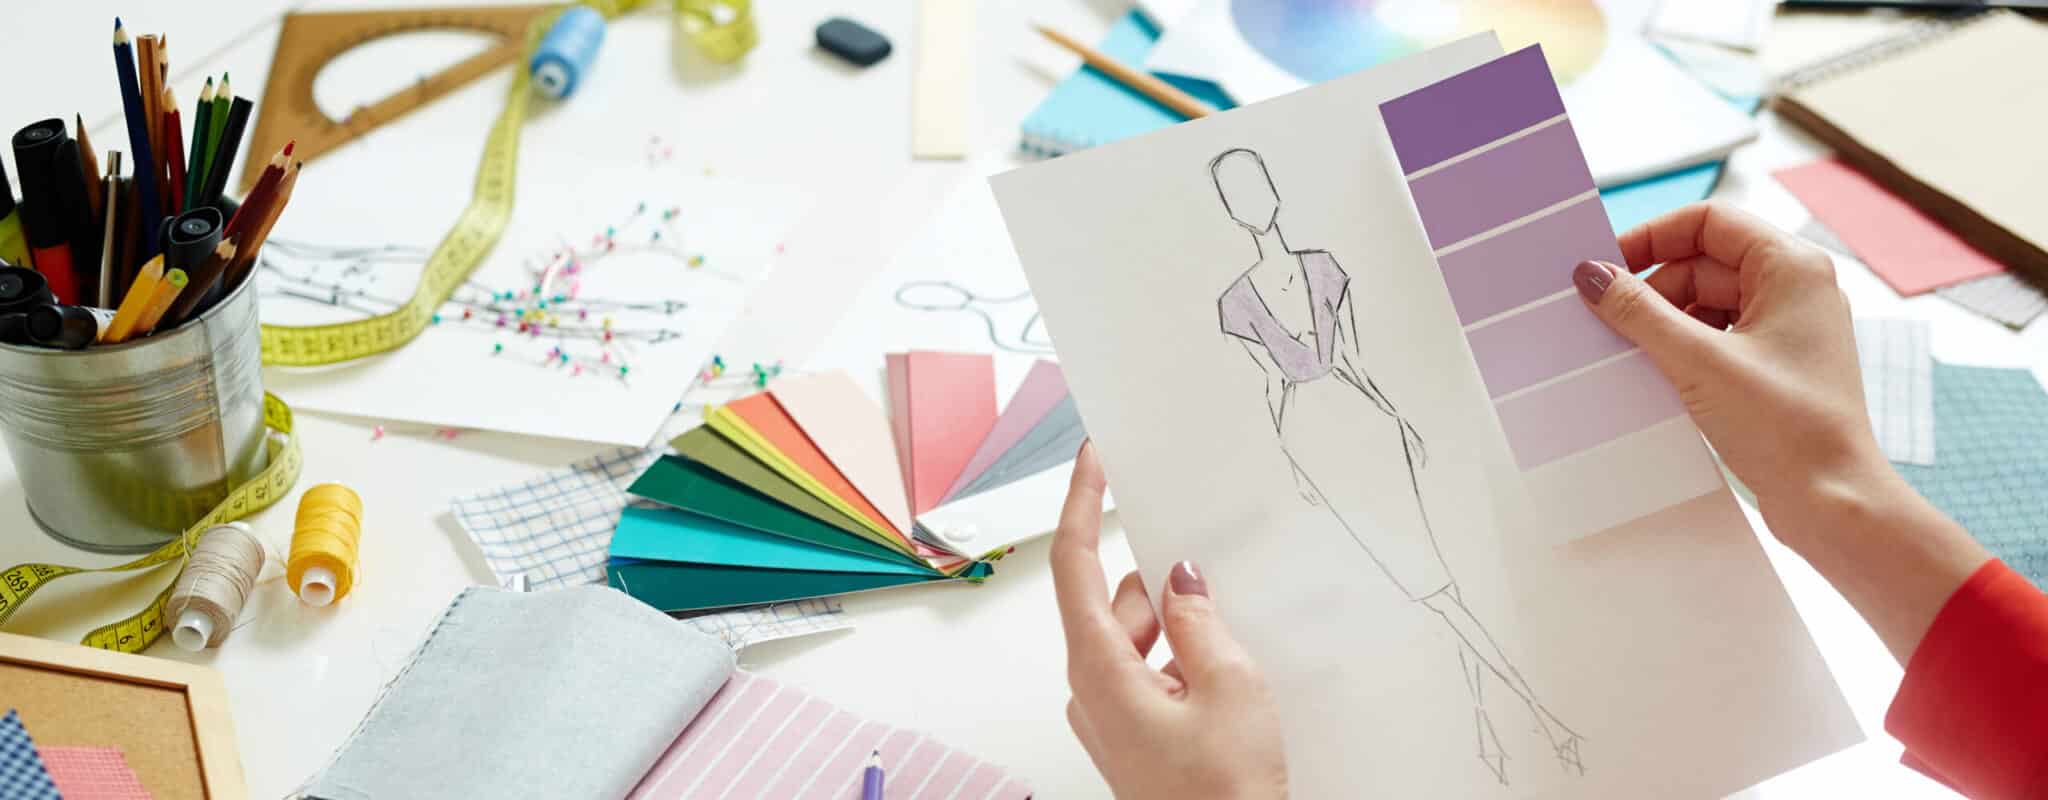 How To Become A Fashion Designer Without A Degree